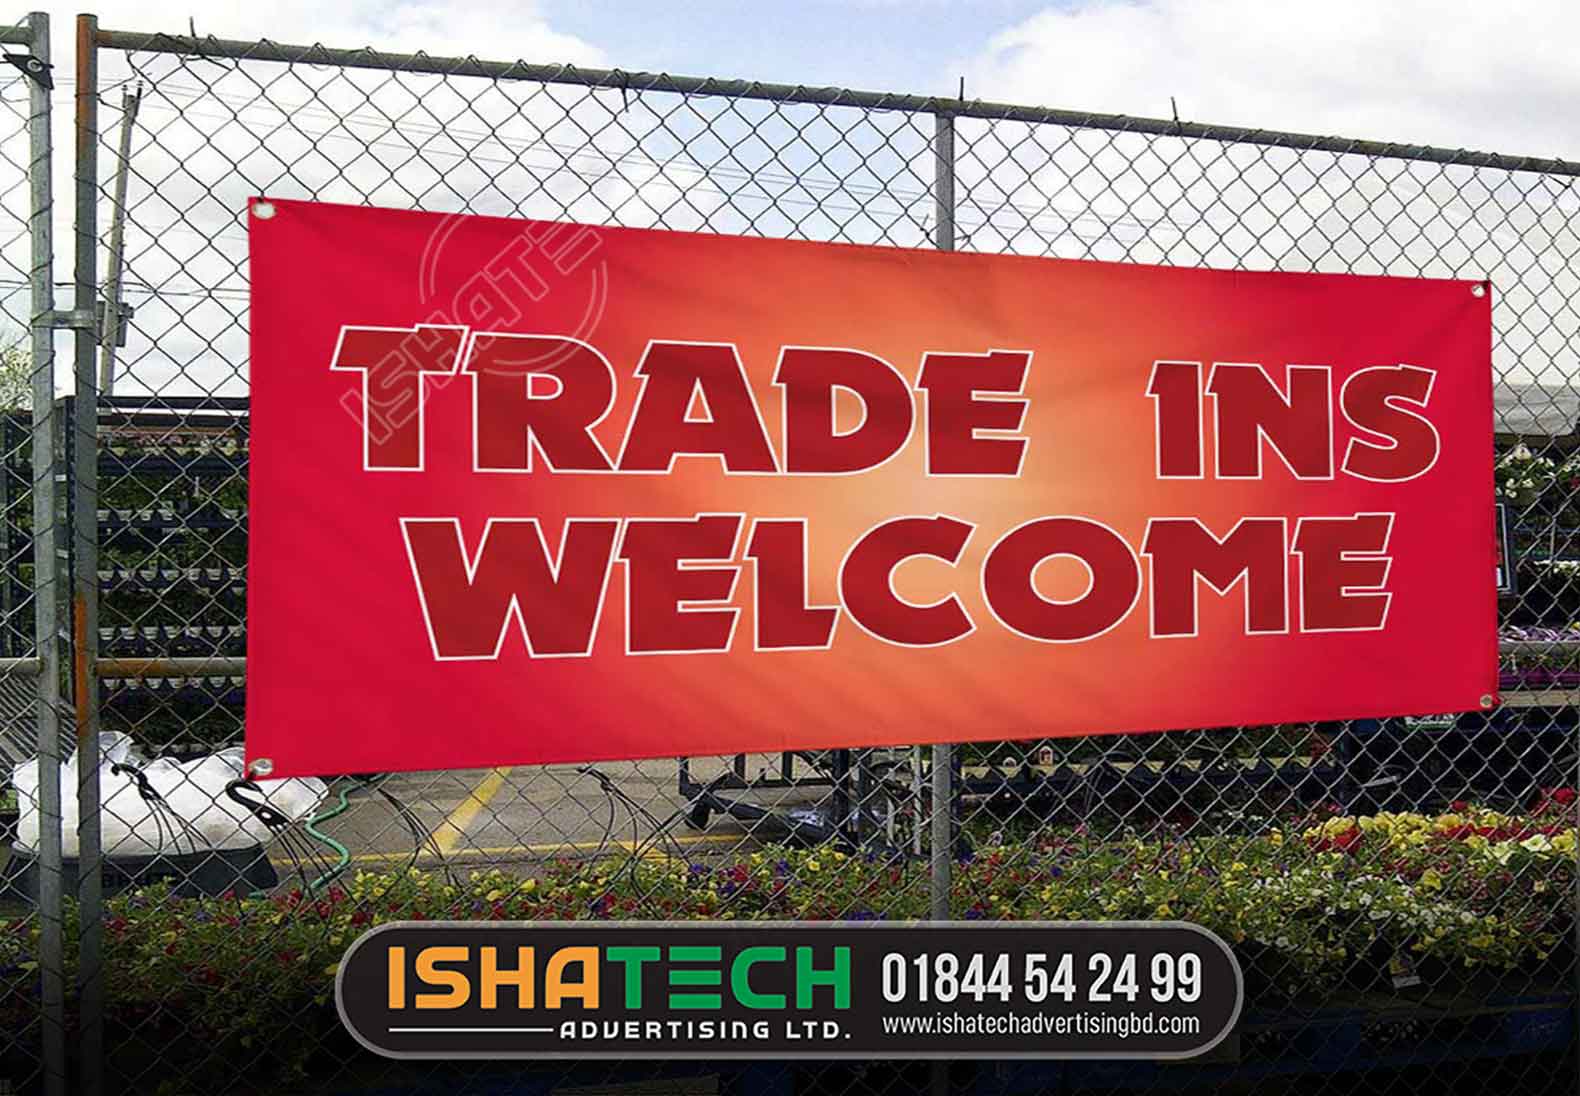 TRADE INS WELCOME OUTDOOR PROJECTS SIGNBOARD DESIGN AND MAKING SERVICE IN DHAKA, BANGLADESH